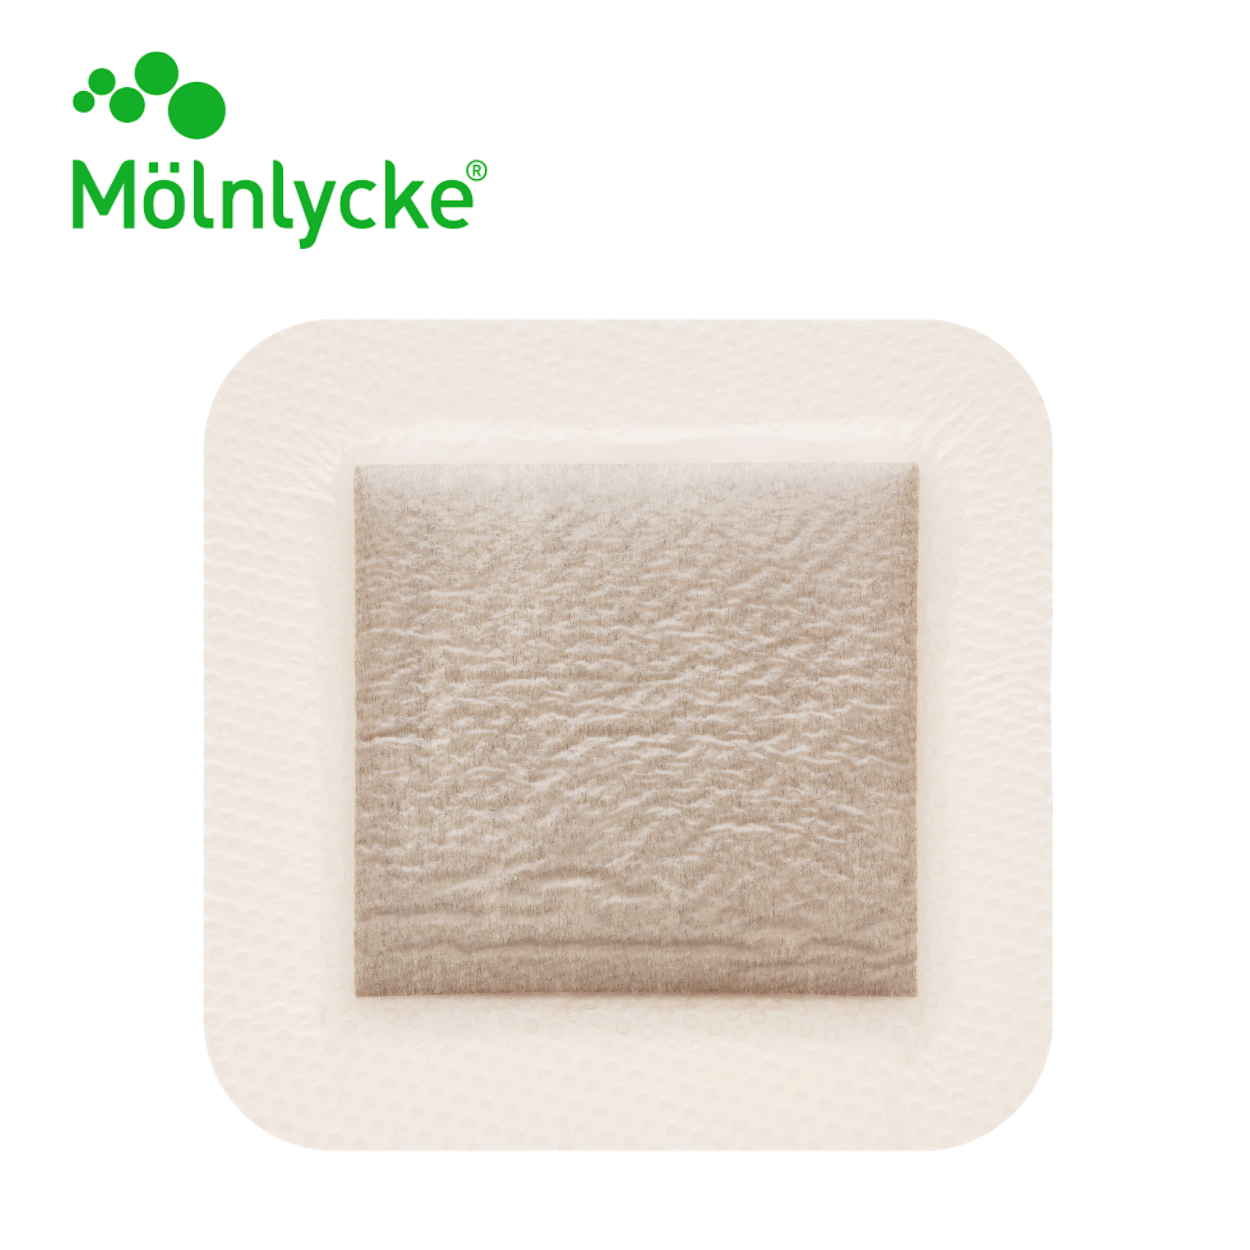 Molnlycke Products (16)